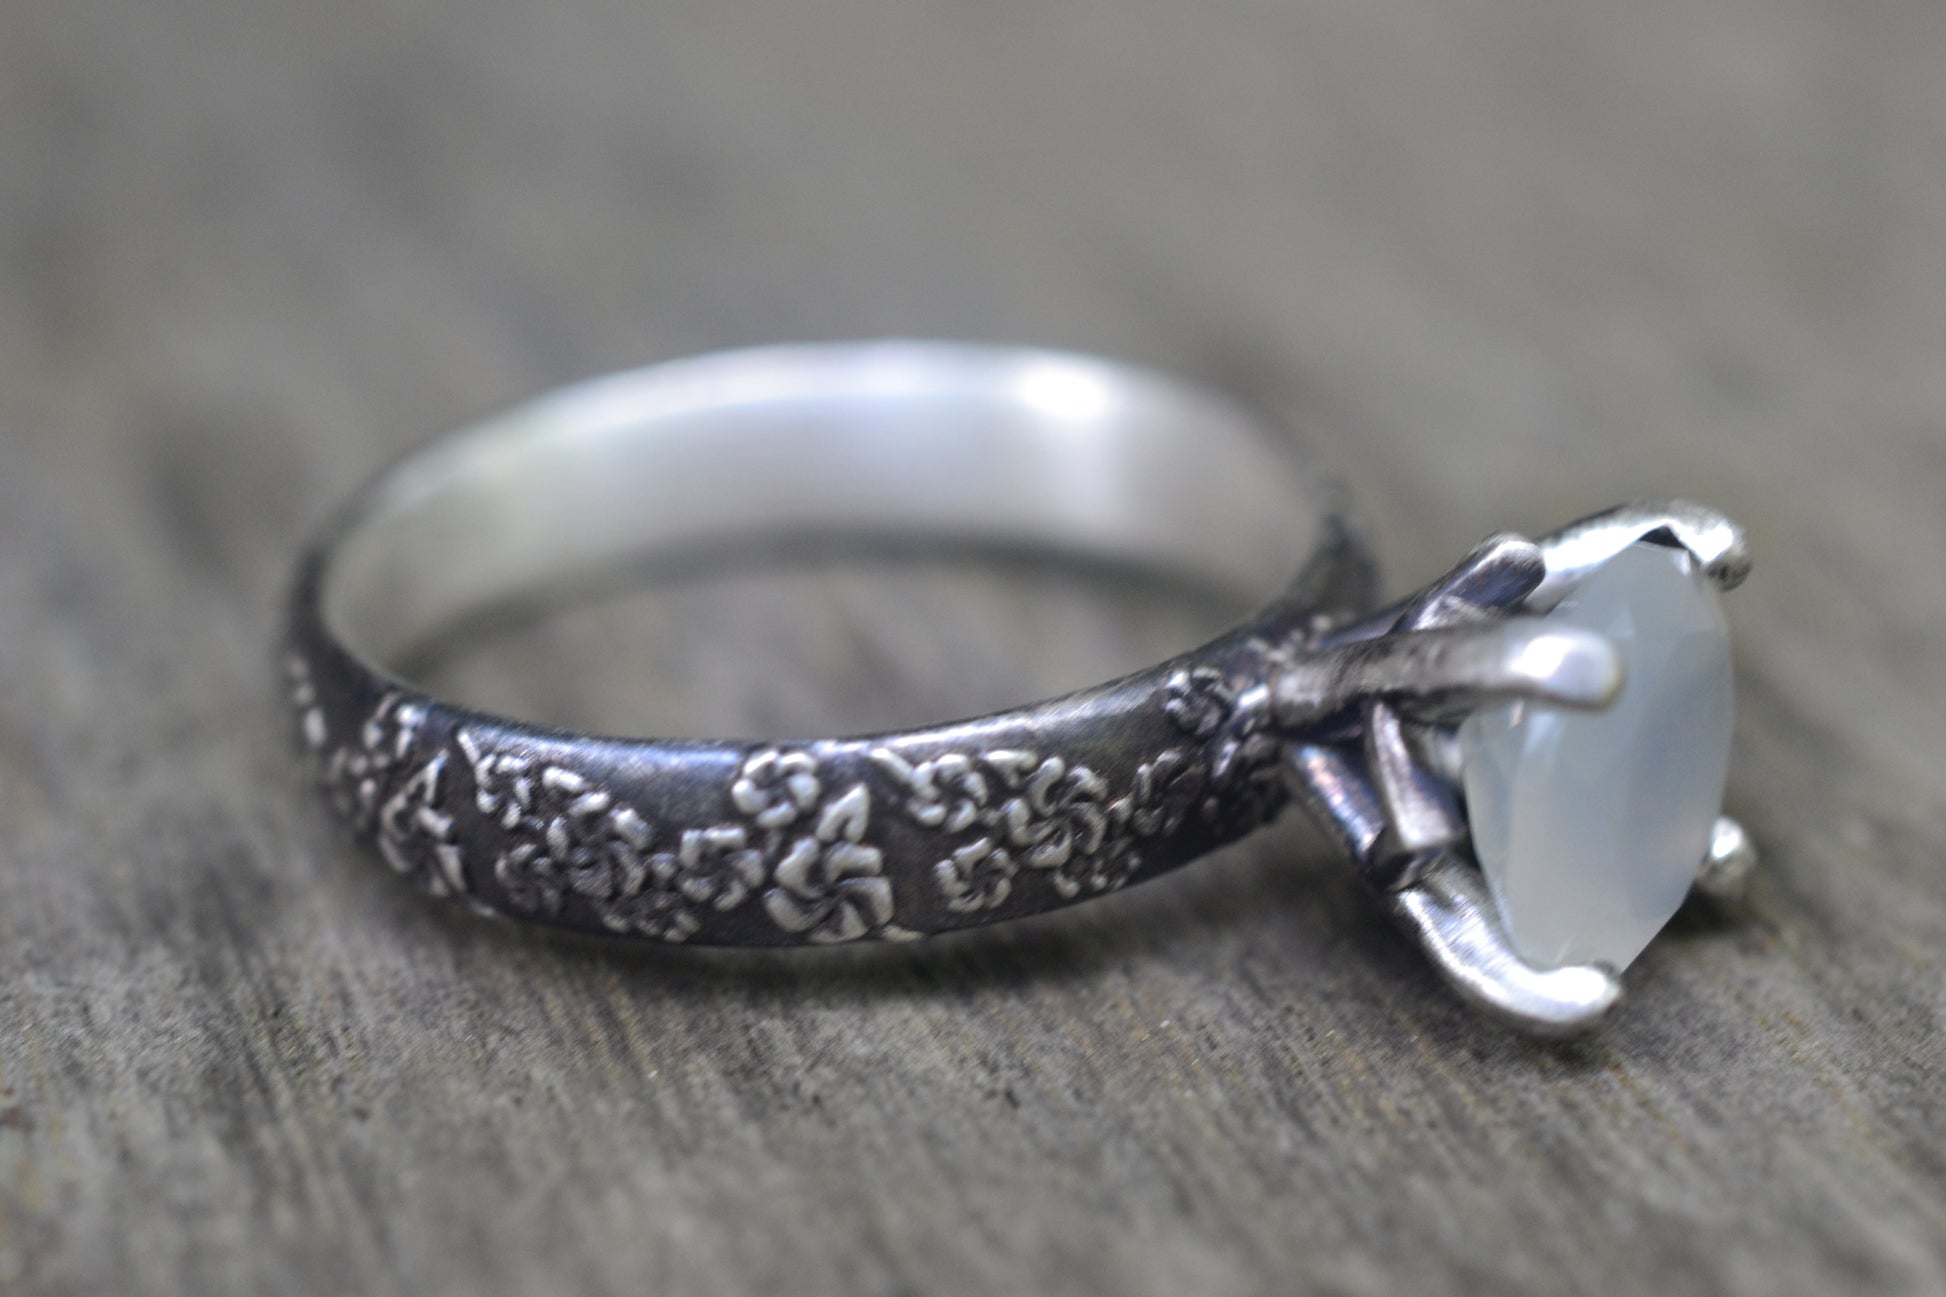 Cherry Blossom Ring in Silver With Moonstone